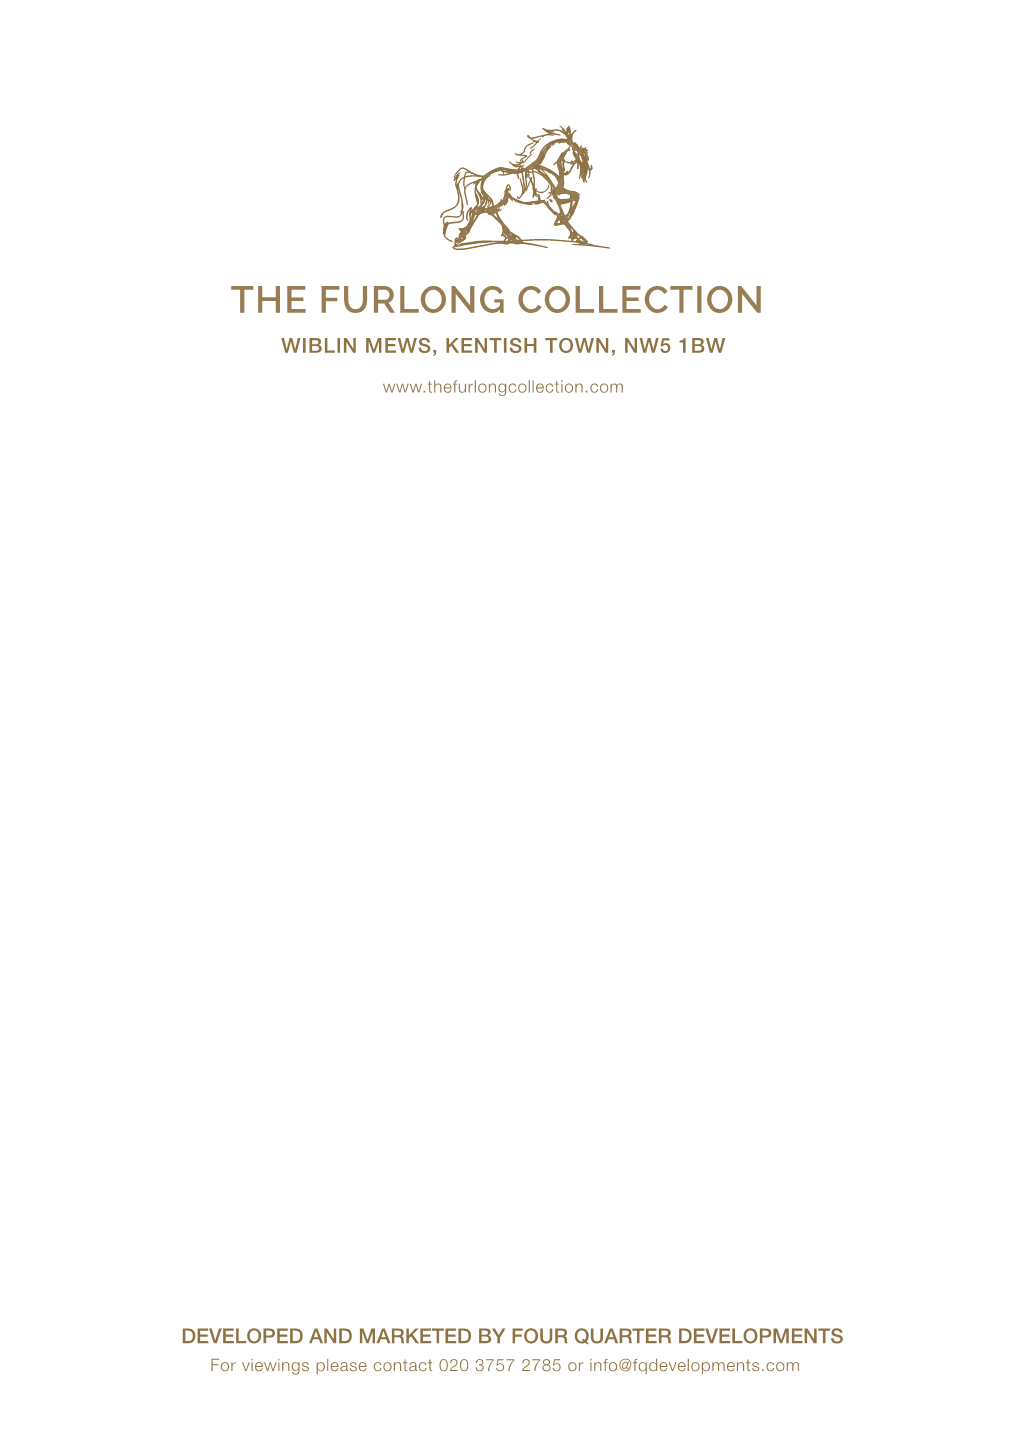 The Furlong Collection Wiblin Mews, Kentish Town, Nw5 1Bw